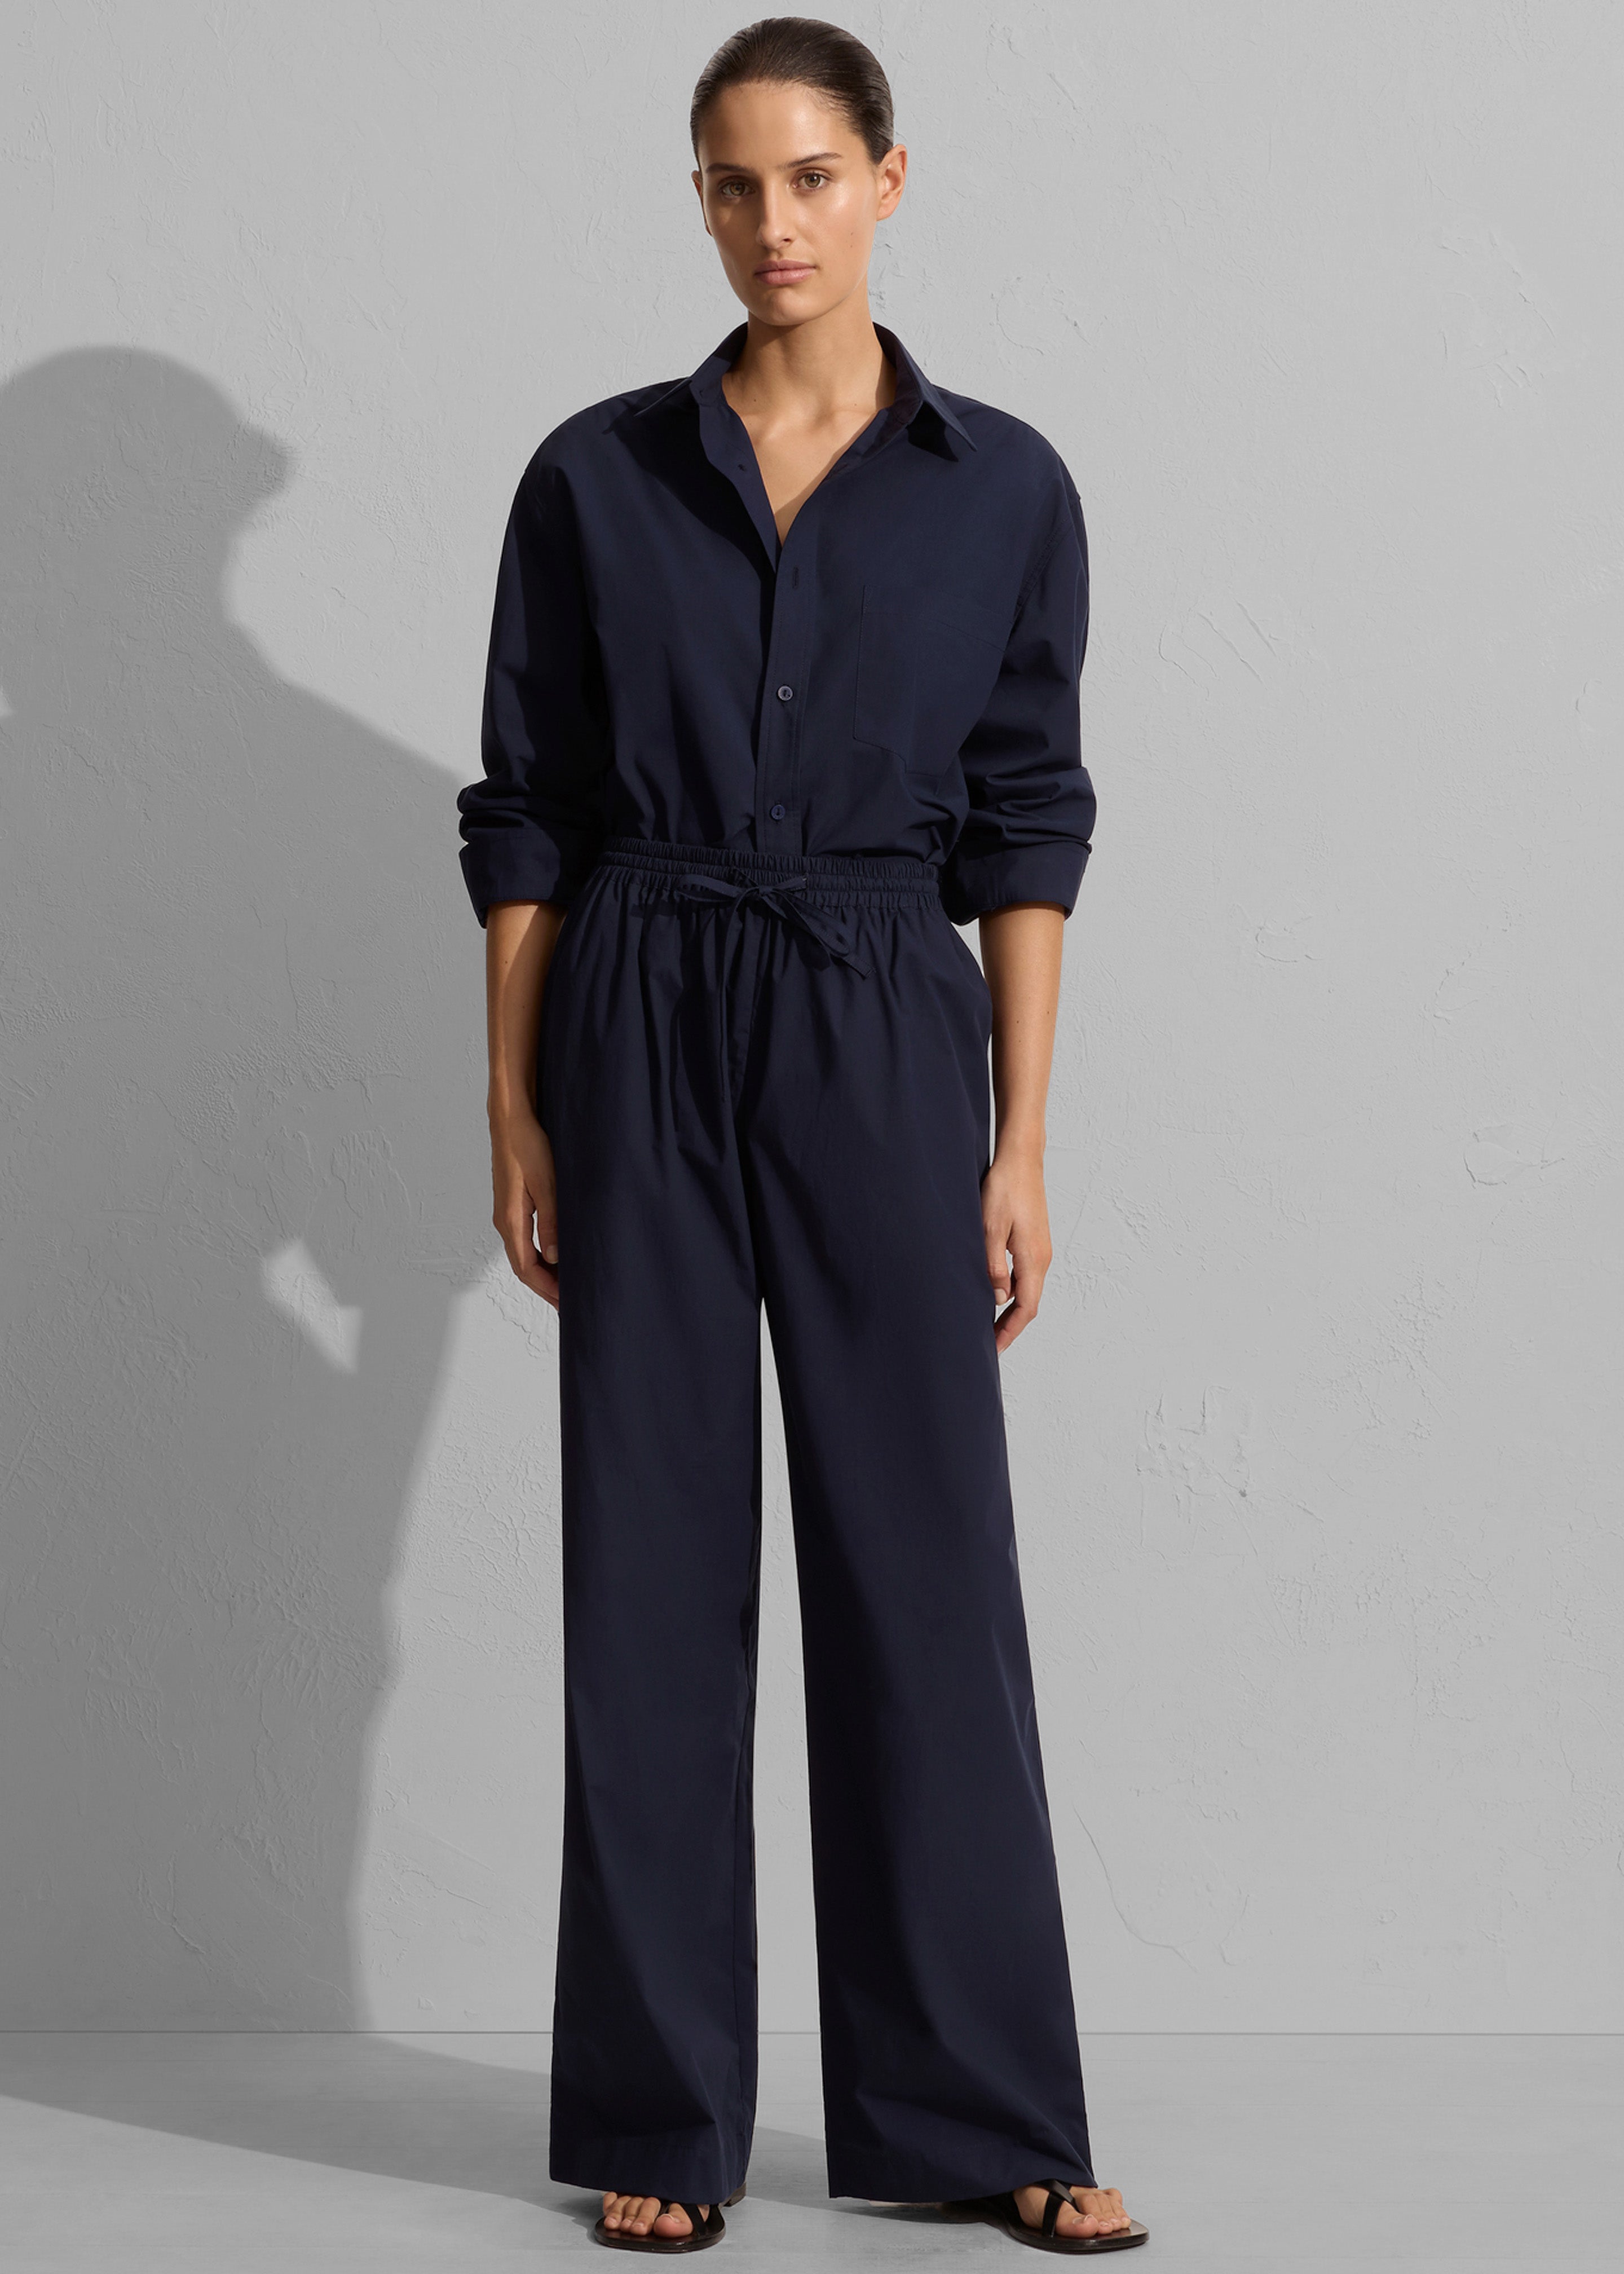 Matteau Relaxed Pant - Navy - 1